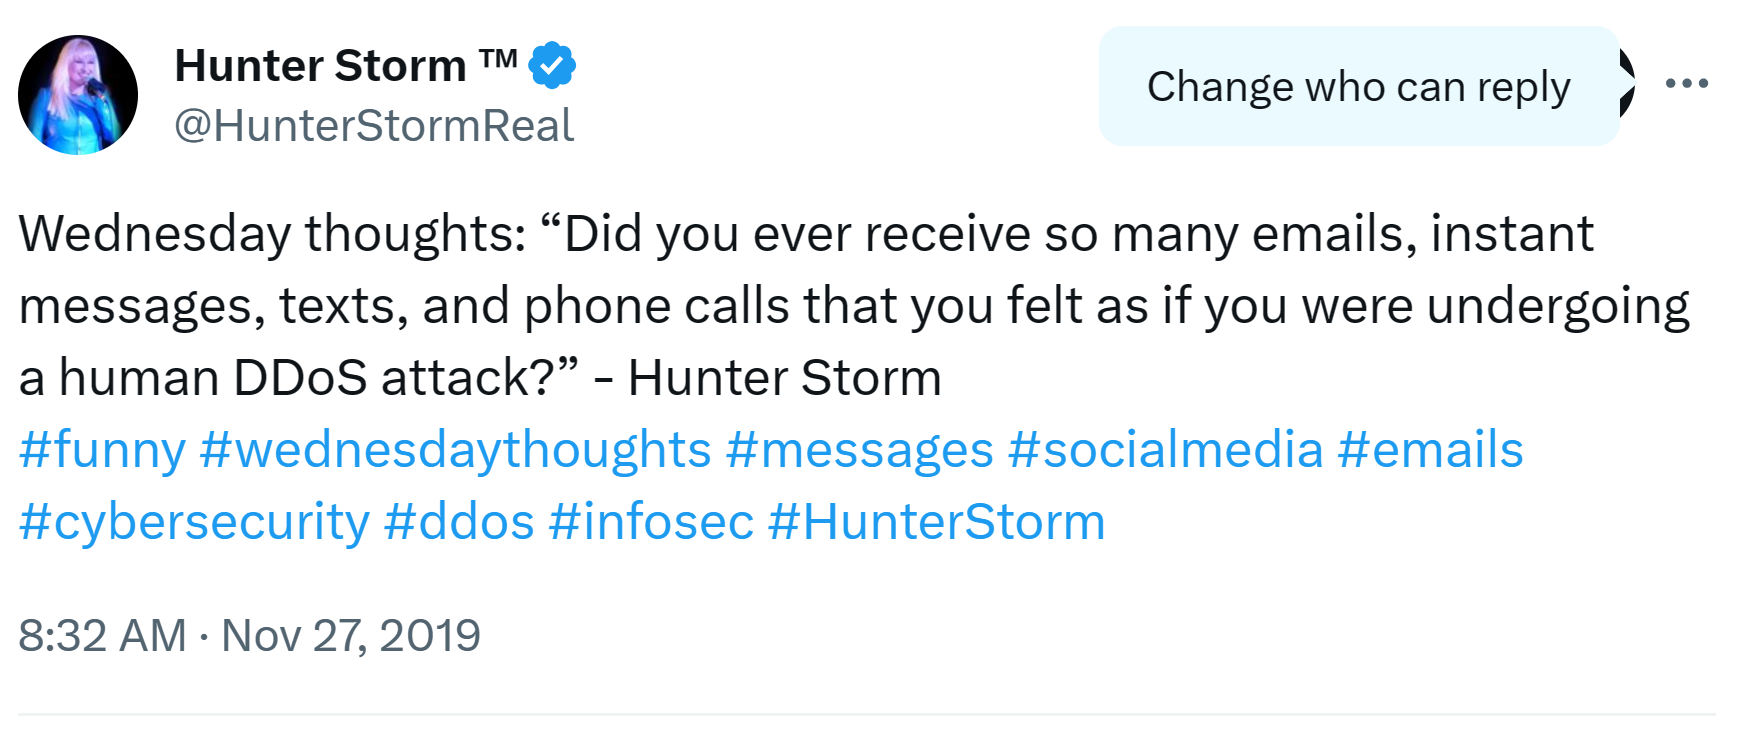 Hunter Storm Wisdom: Timeless Insights and Inspiration | "Wednesday thoughts: 'Did you ever receive so many emails, instant messages, texts, and phone calls that you felt as if you were undergoing a human DDos attack?'"